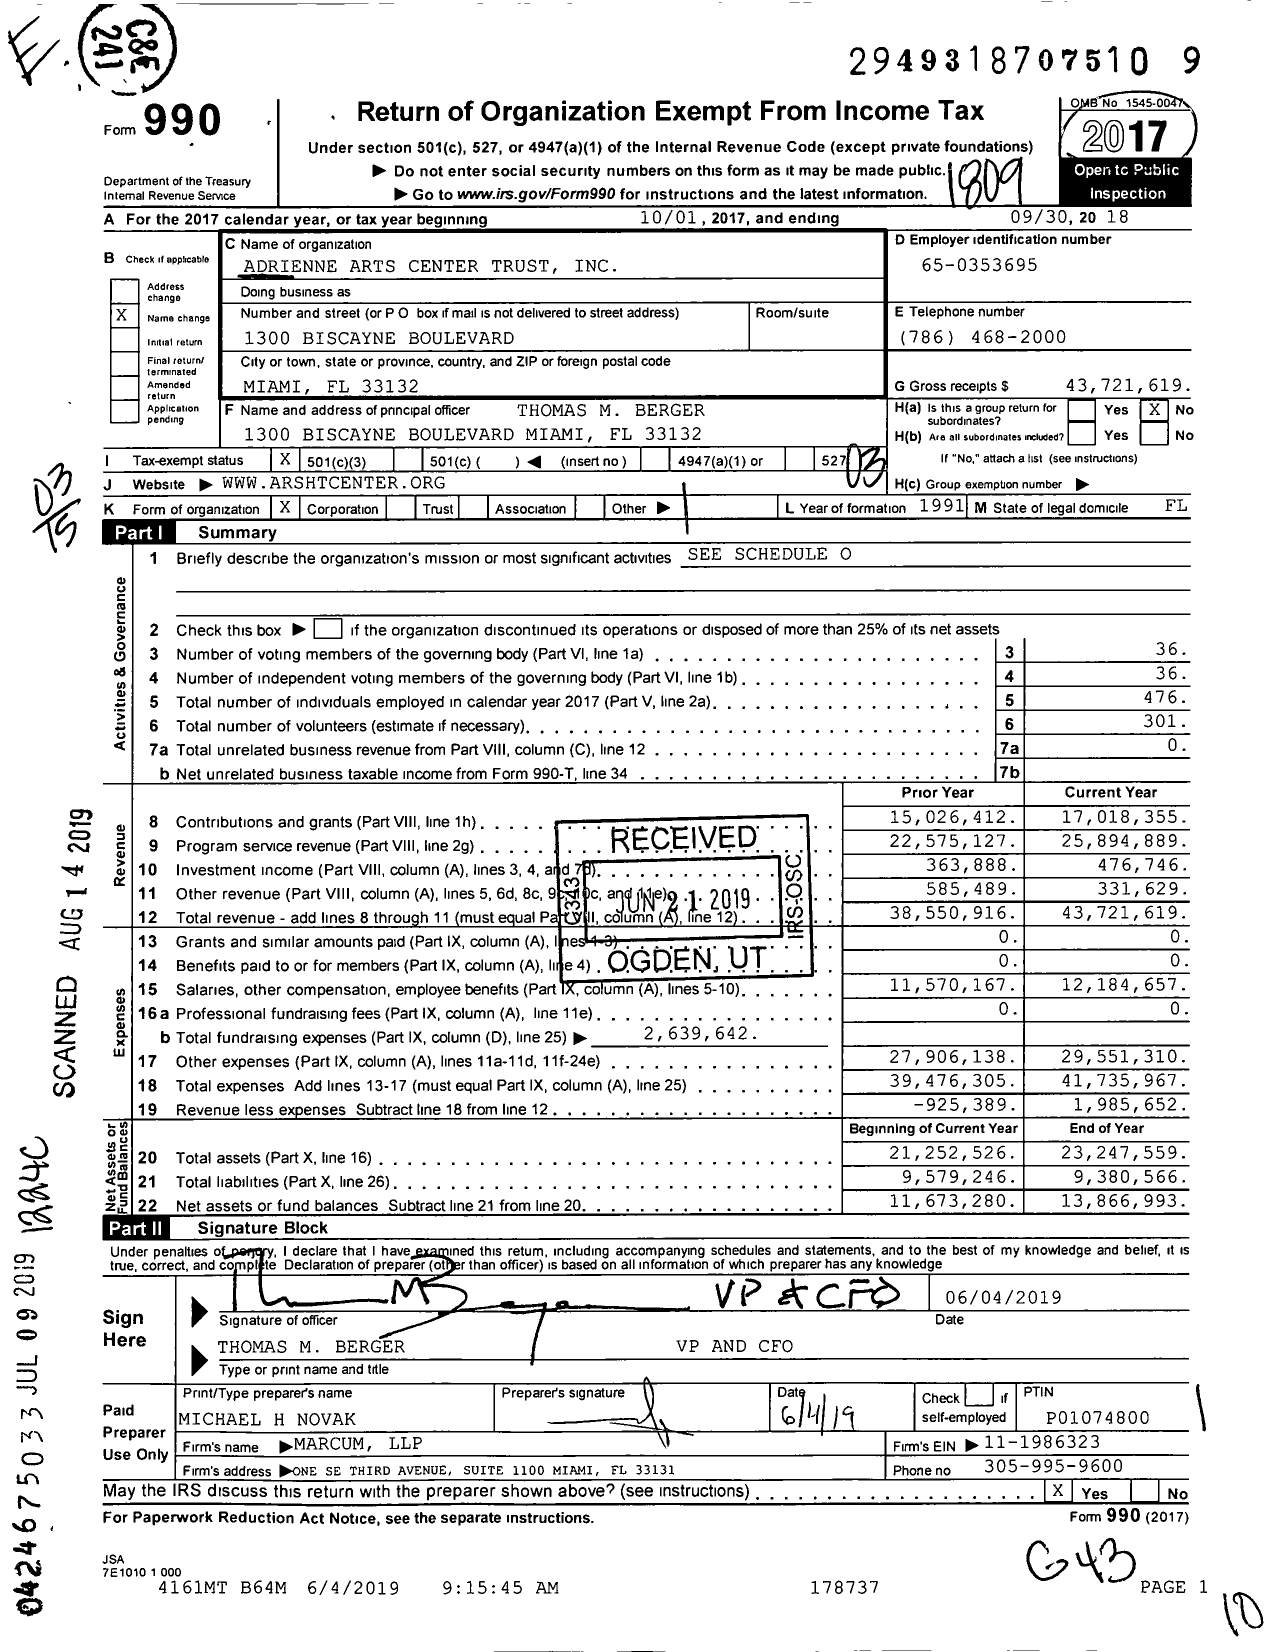 Image of first page of 2017 Form 990 for Adrienne Arsht Center Trust